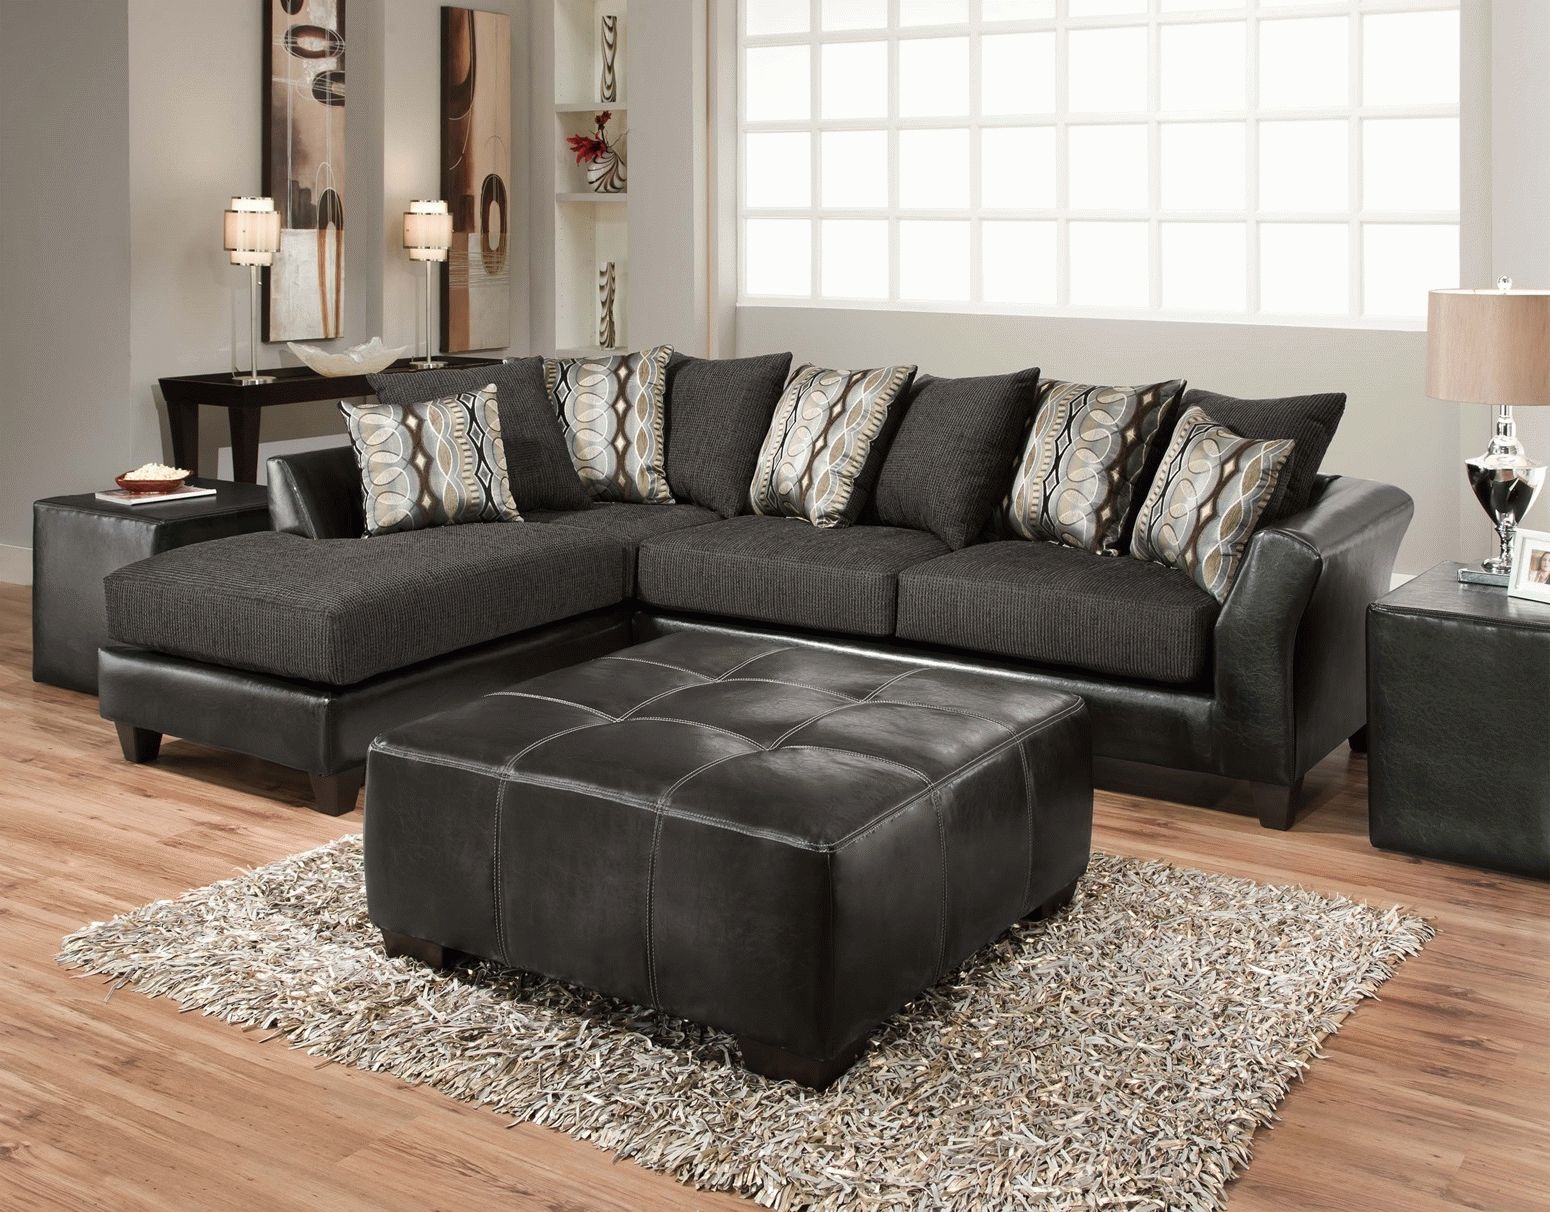 Most Recent Interior: Gorgeous Lady Charcoal Sectional For Living Room Regarding Value City Sectional Sofas (View 14 of 20)